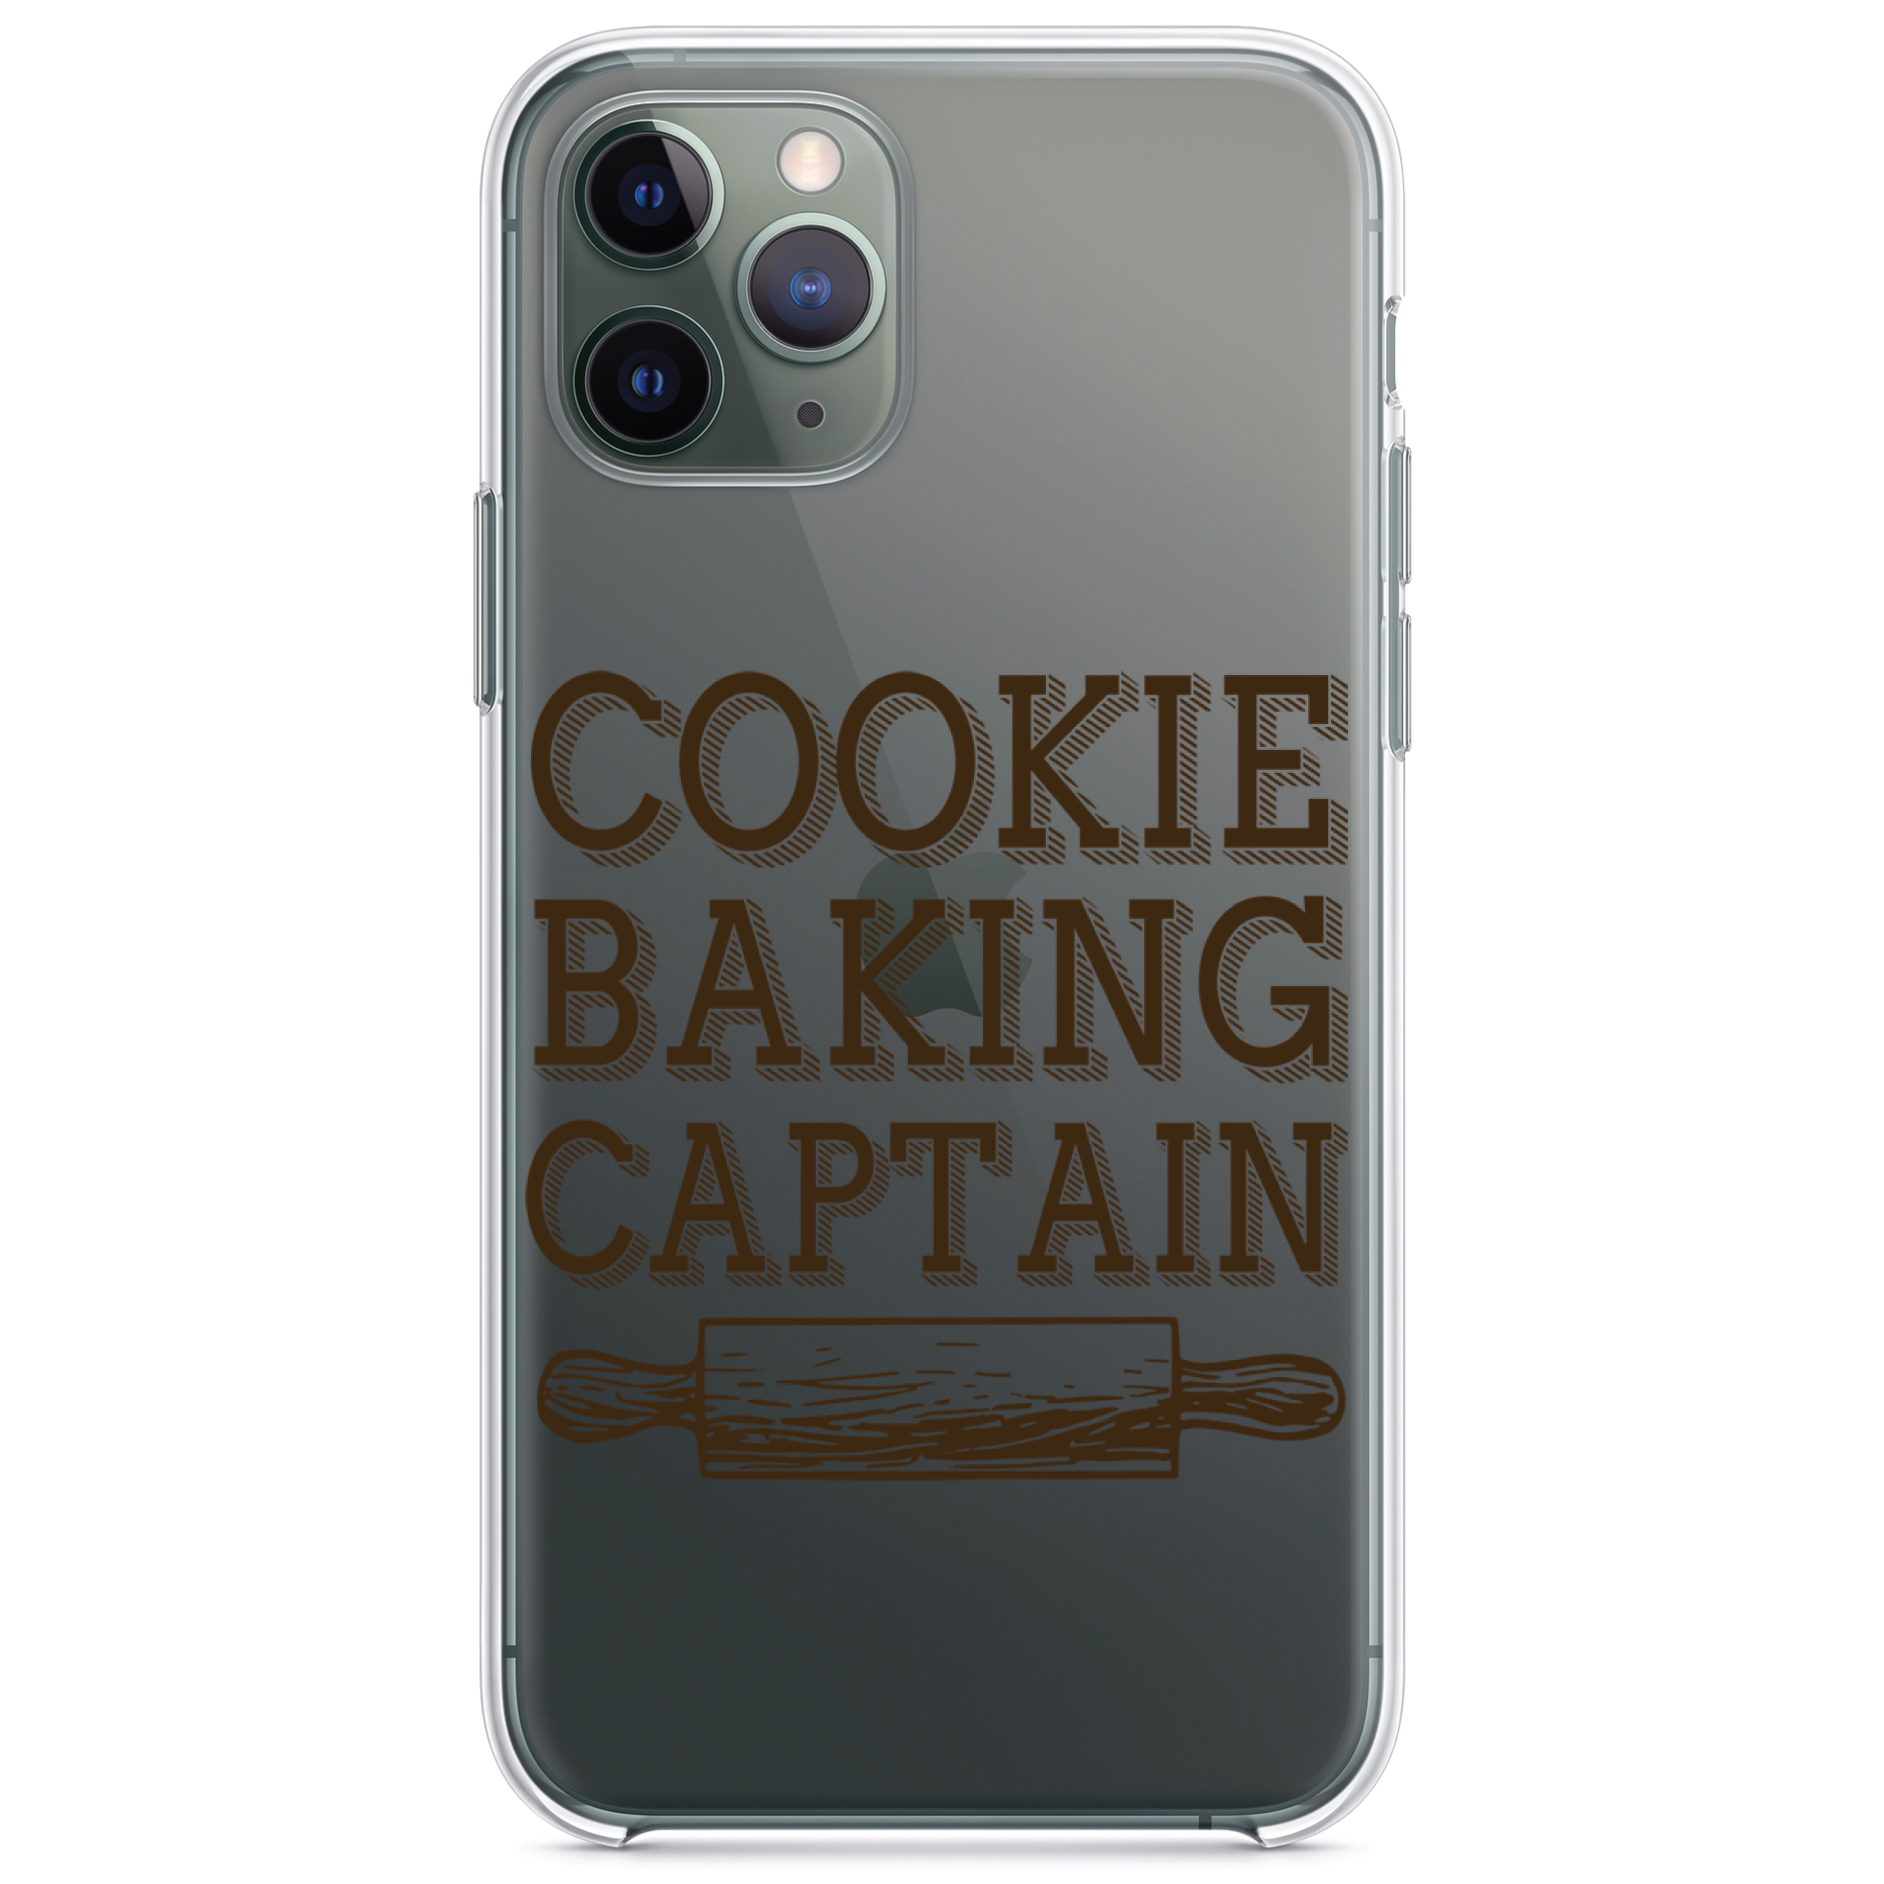 Pin on iPhone cases